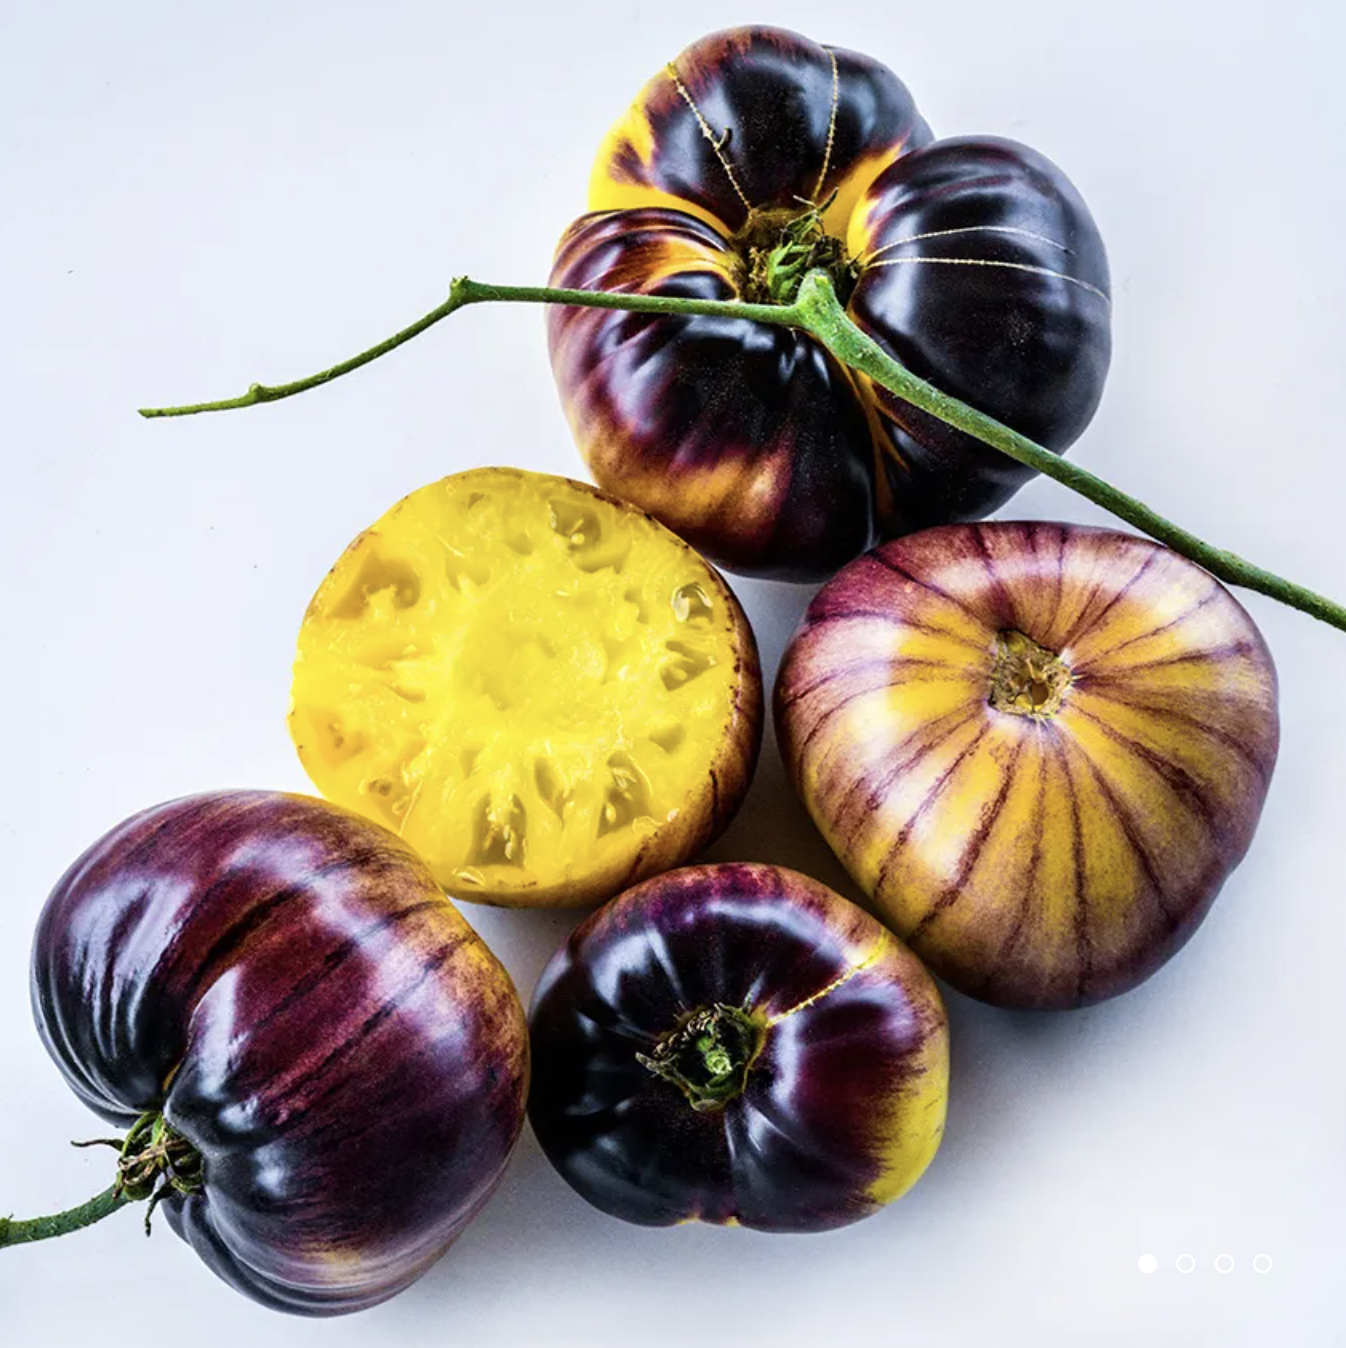 Heirloom tomatoes - can't you taste them?